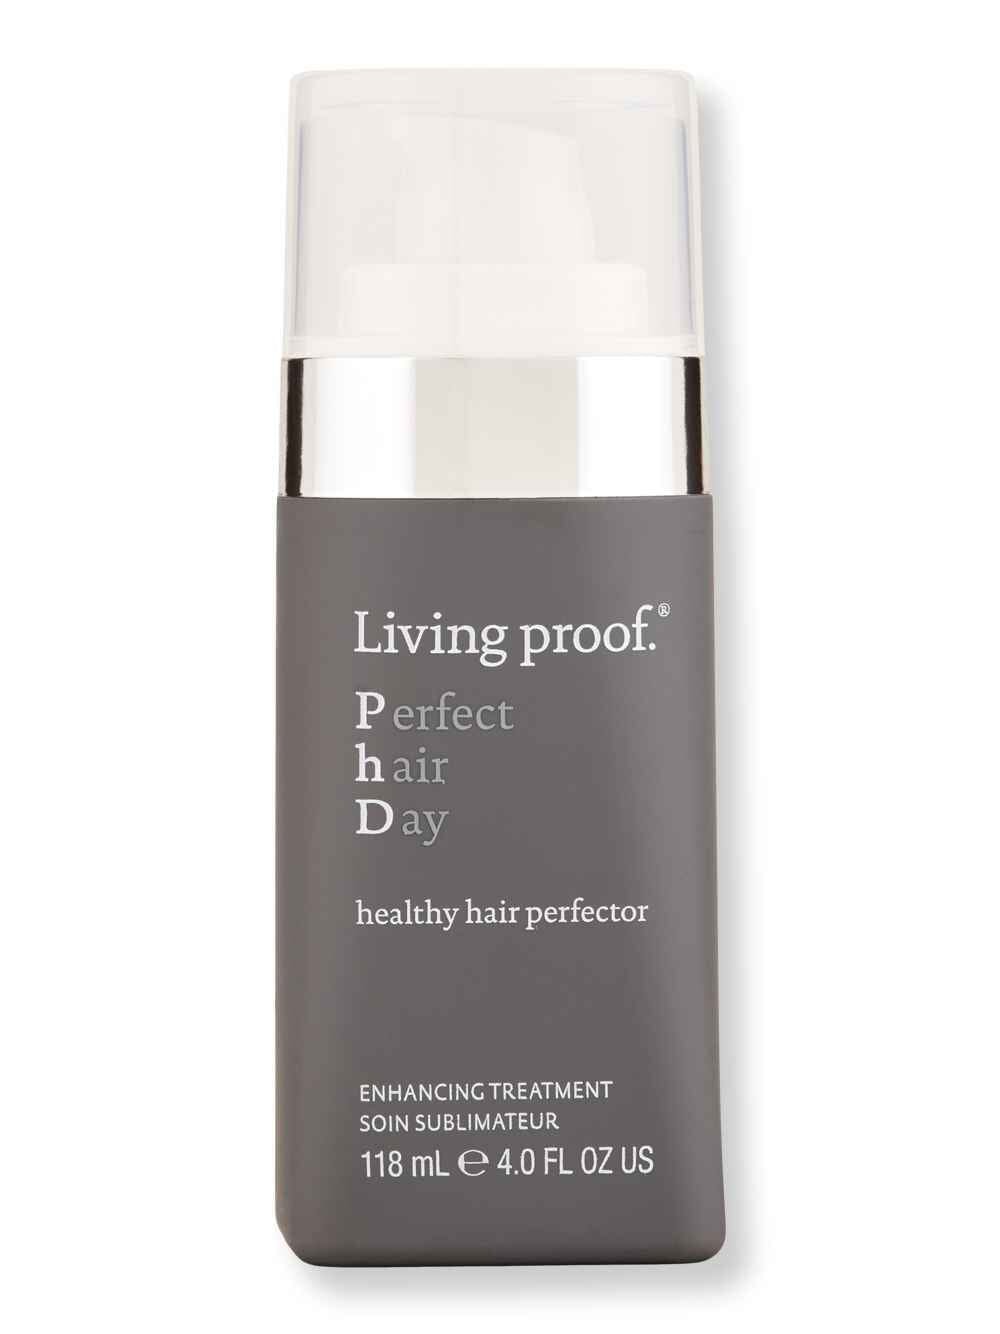 Living Proof Living Proof PhD Healthy Hair Perfector 4 oz Styling Treatments 